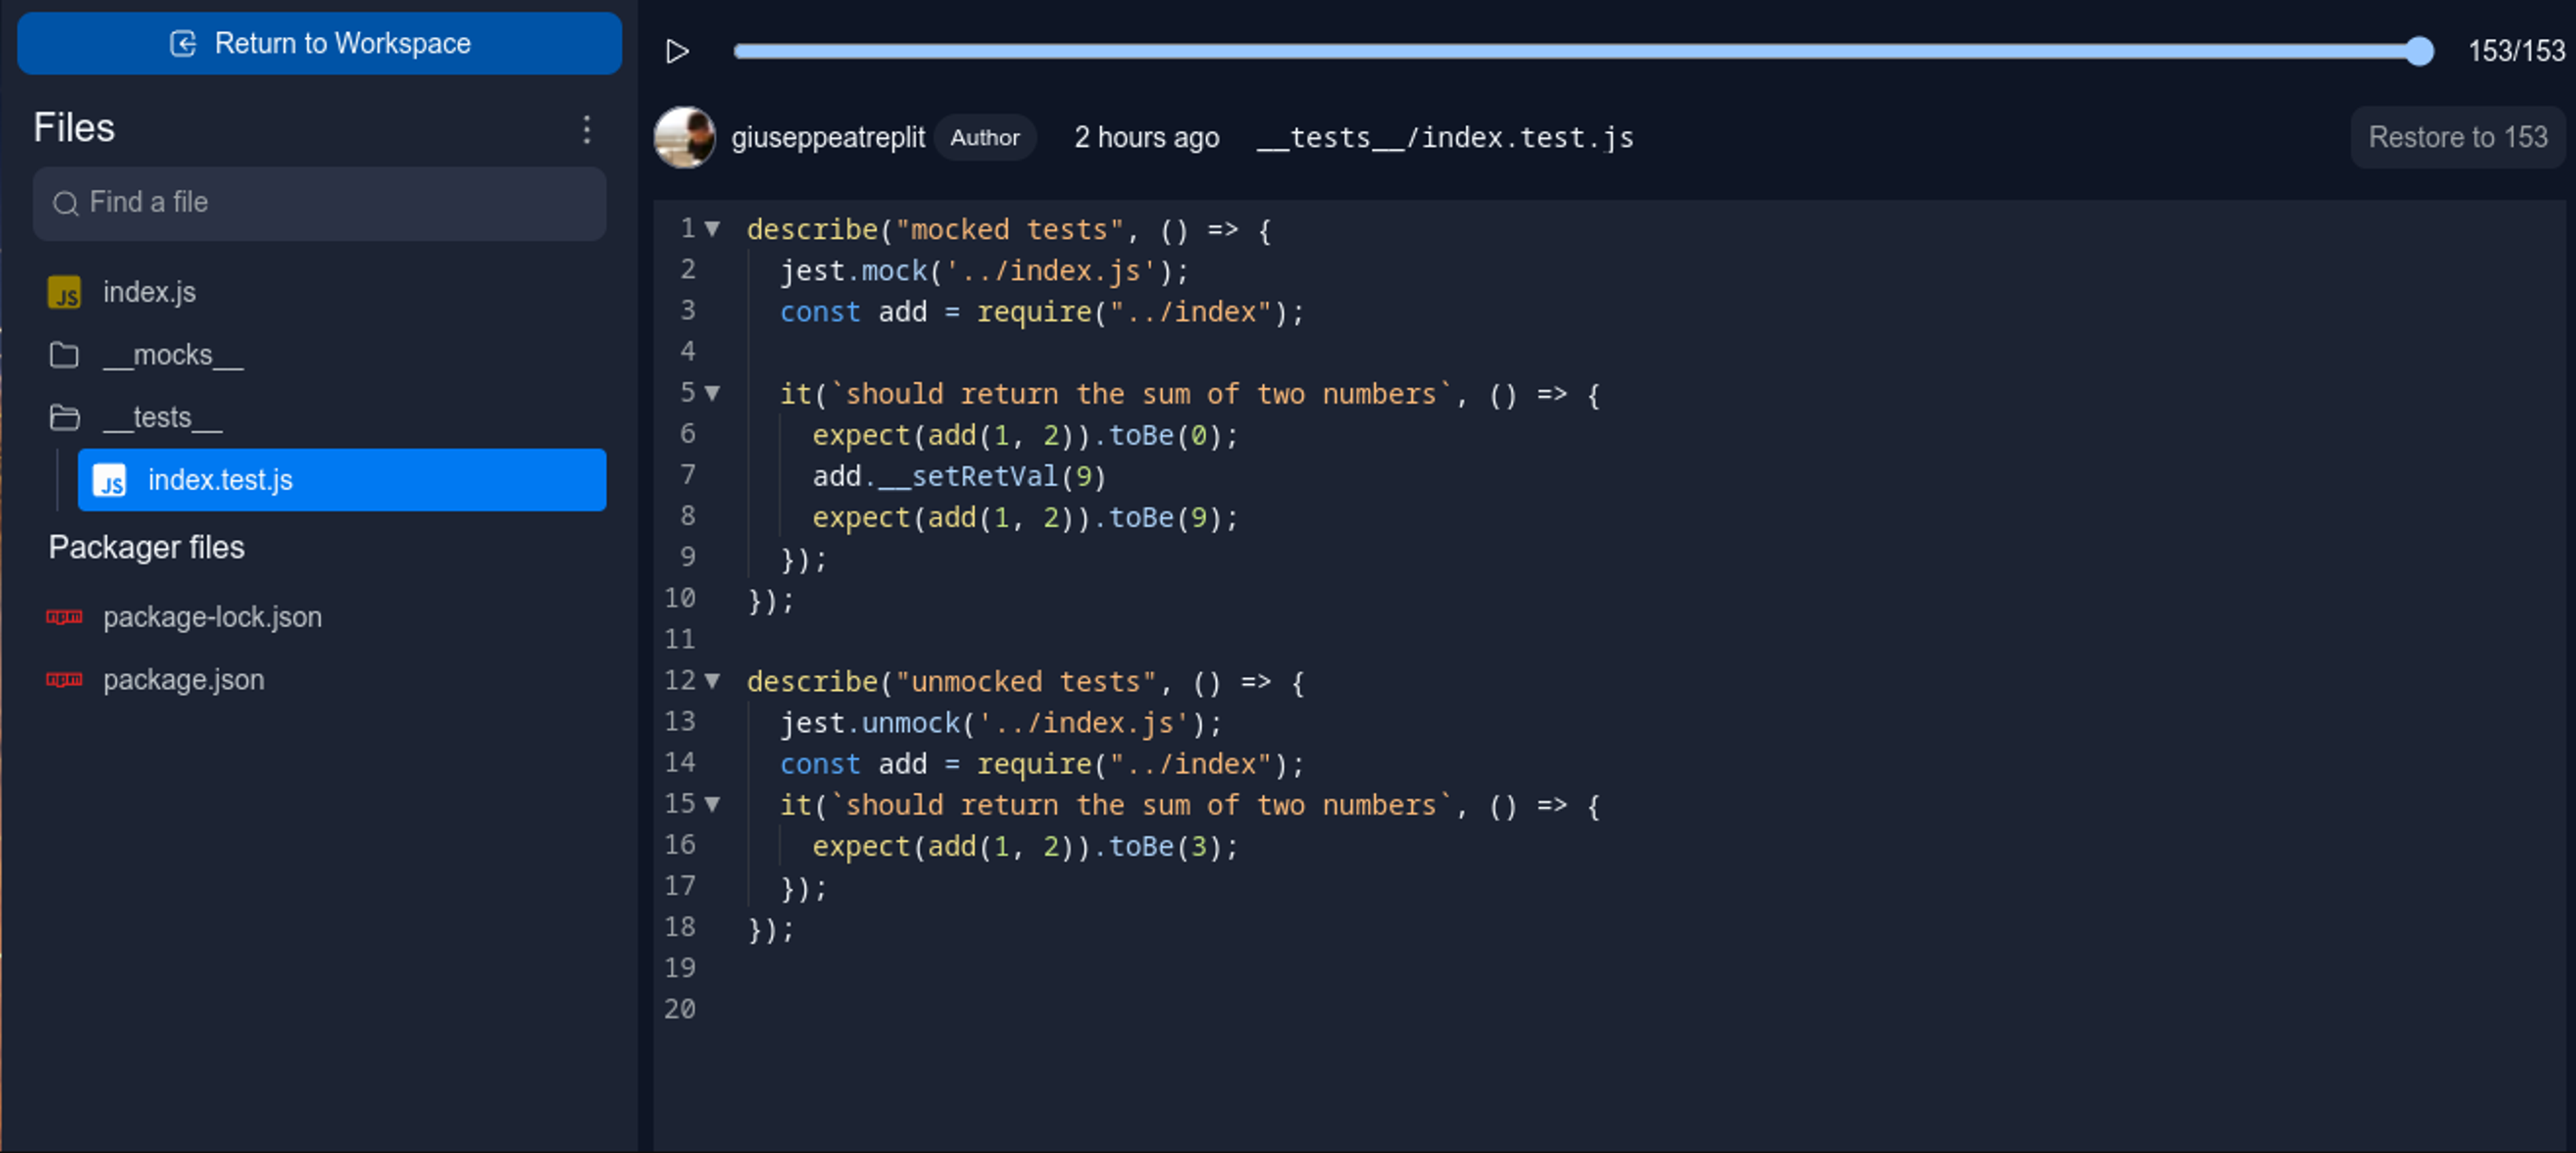 A screenshot of the new history tool, showing a unit test suite written in JavaScript